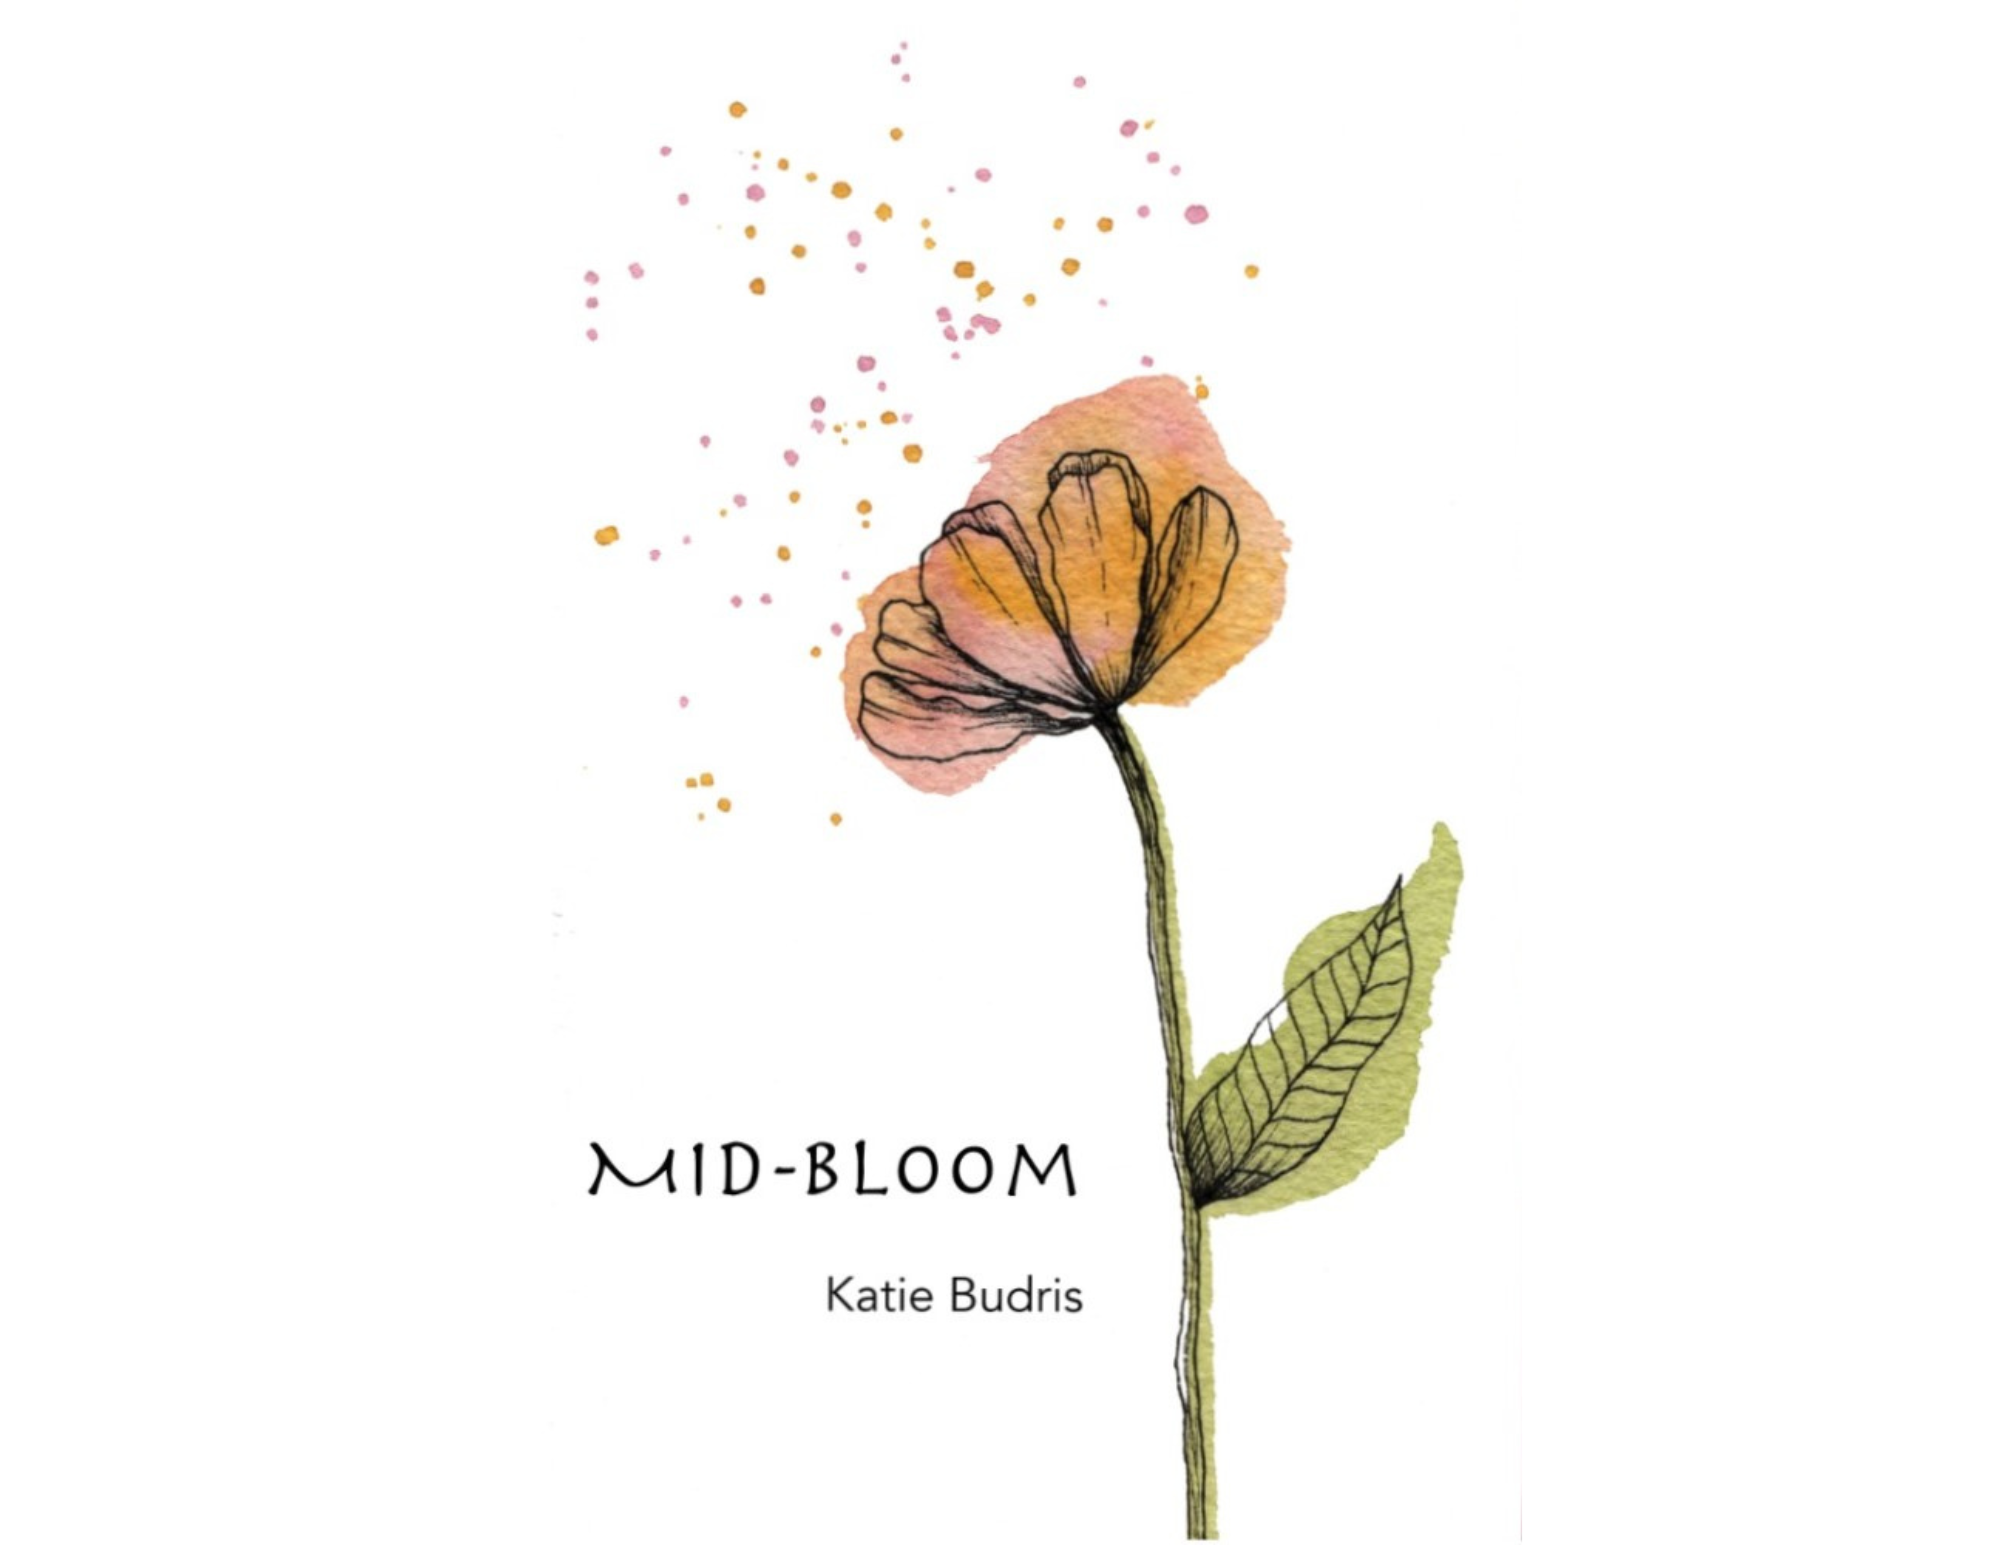 Katie Budris’ Mid-Bloom: Grief and Love Compressed